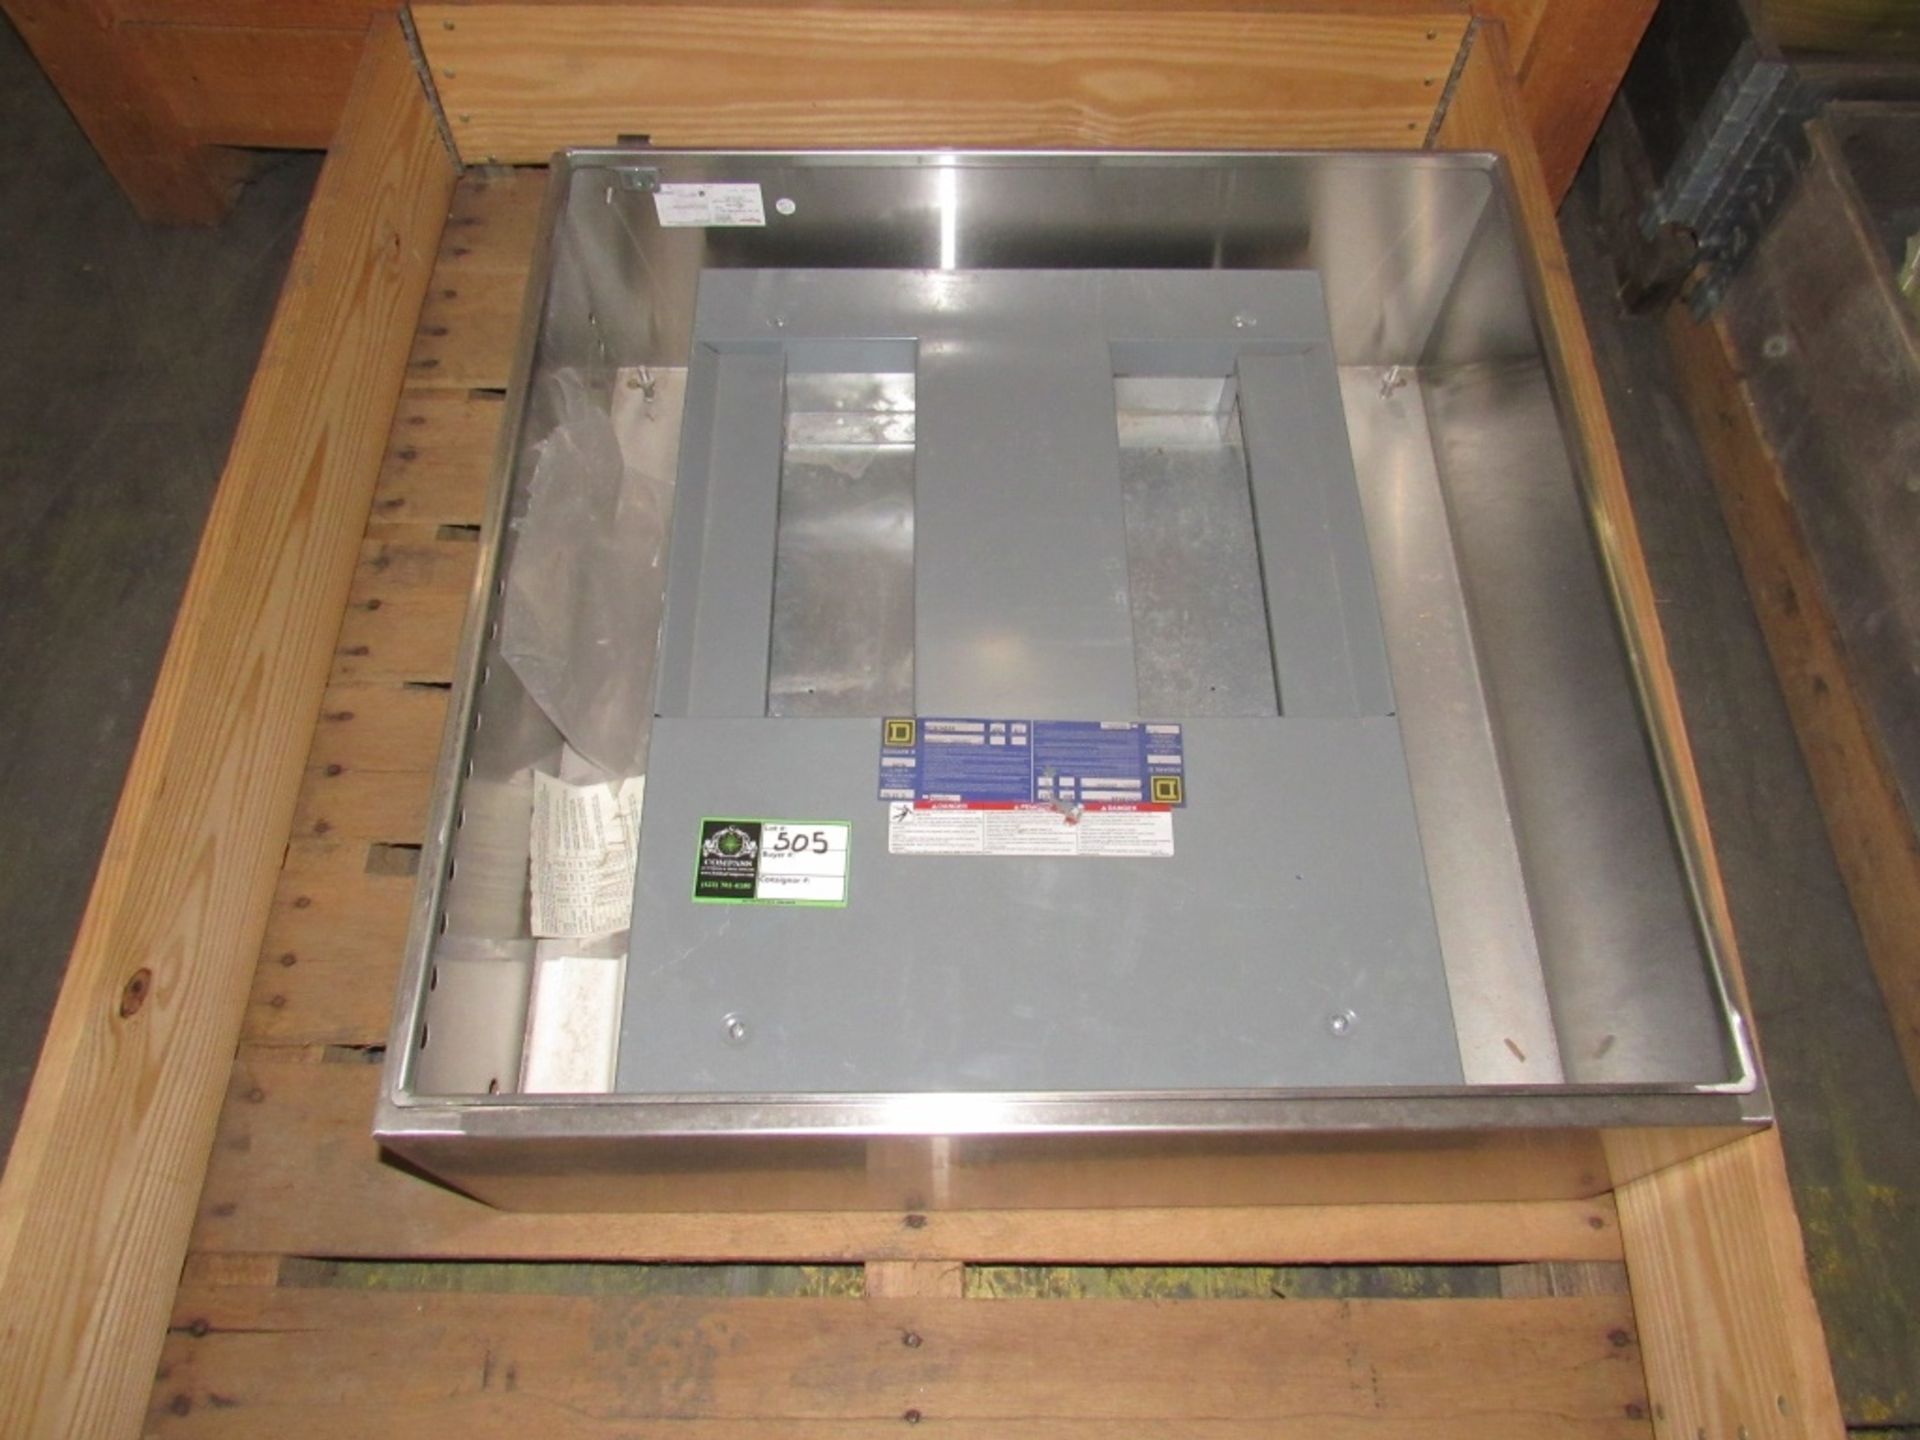 Electrical Control Box- ***Located in Cleveland, TN*** MFR - Square D Cat Number - HCN14524 600